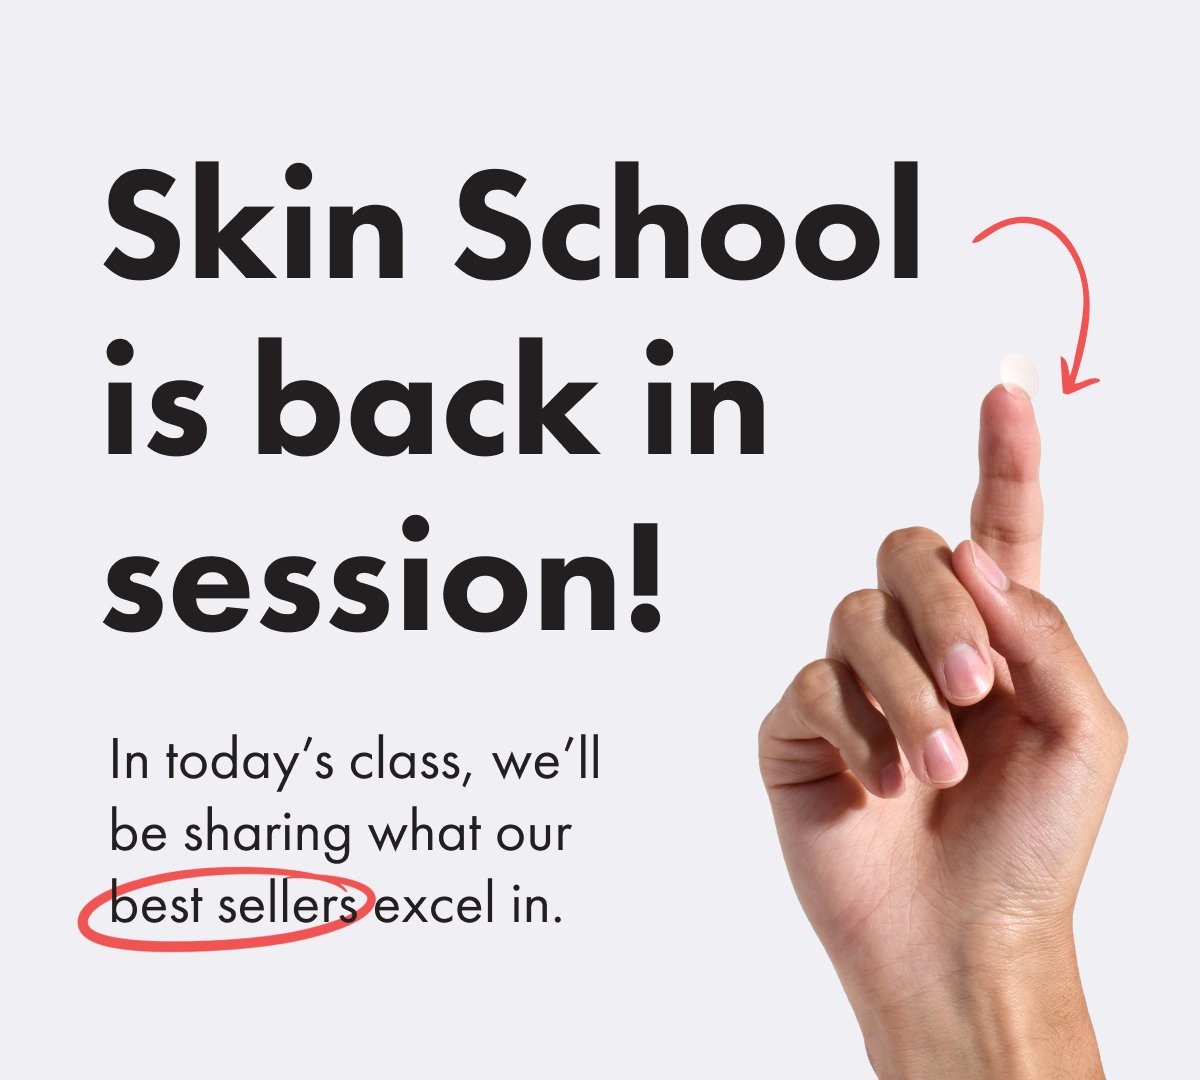 Skin School us back in session!  In today's class, we'll be sharing what our best sellers excel in